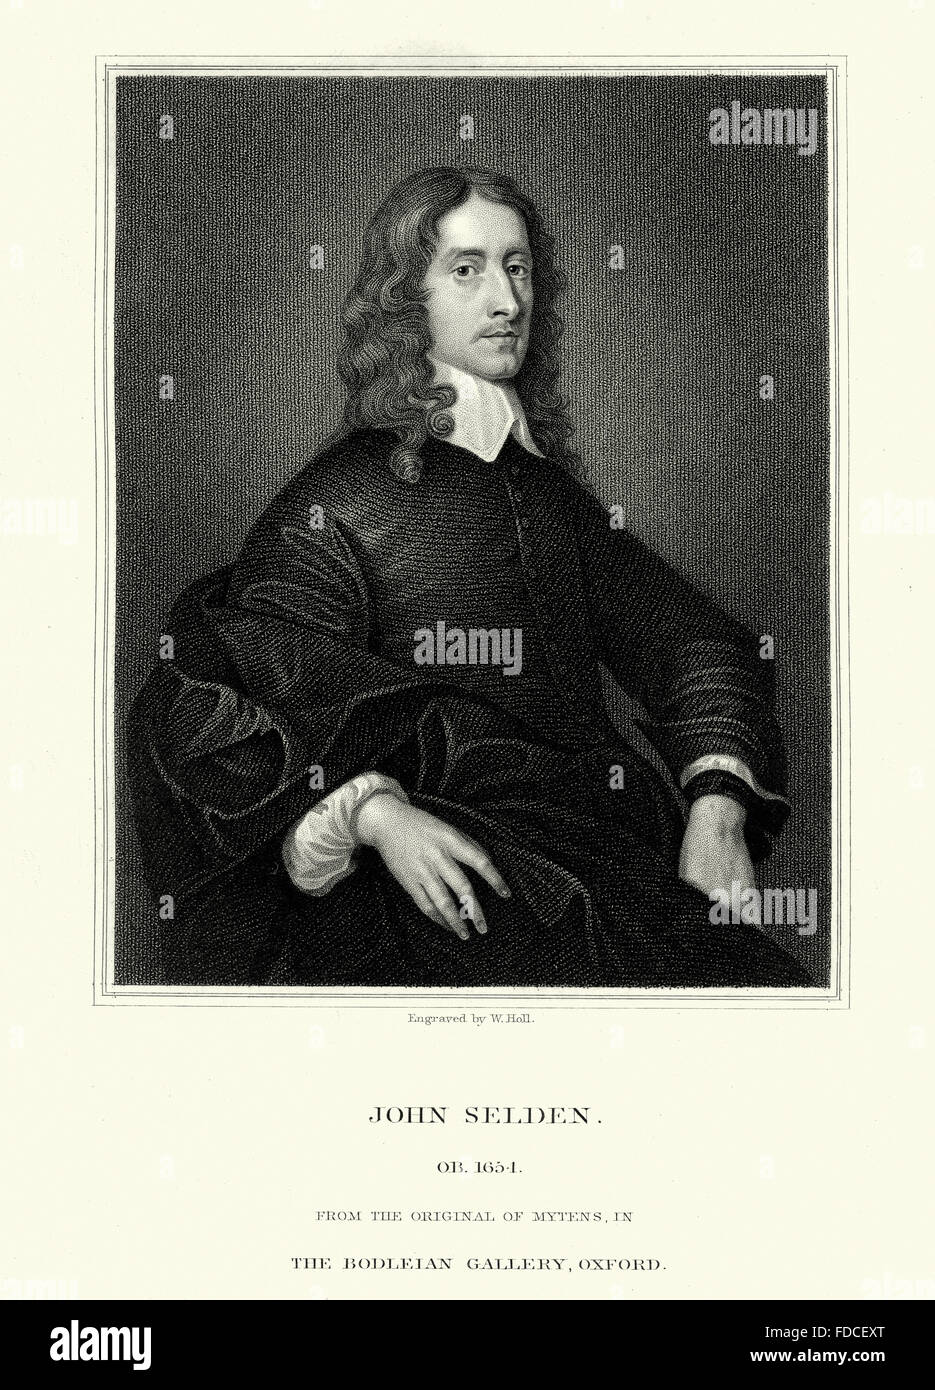 John Selden an English jurist and a scholar of England's ancient laws and constitution and scholar of Jewish law. He was known a Stock Photo